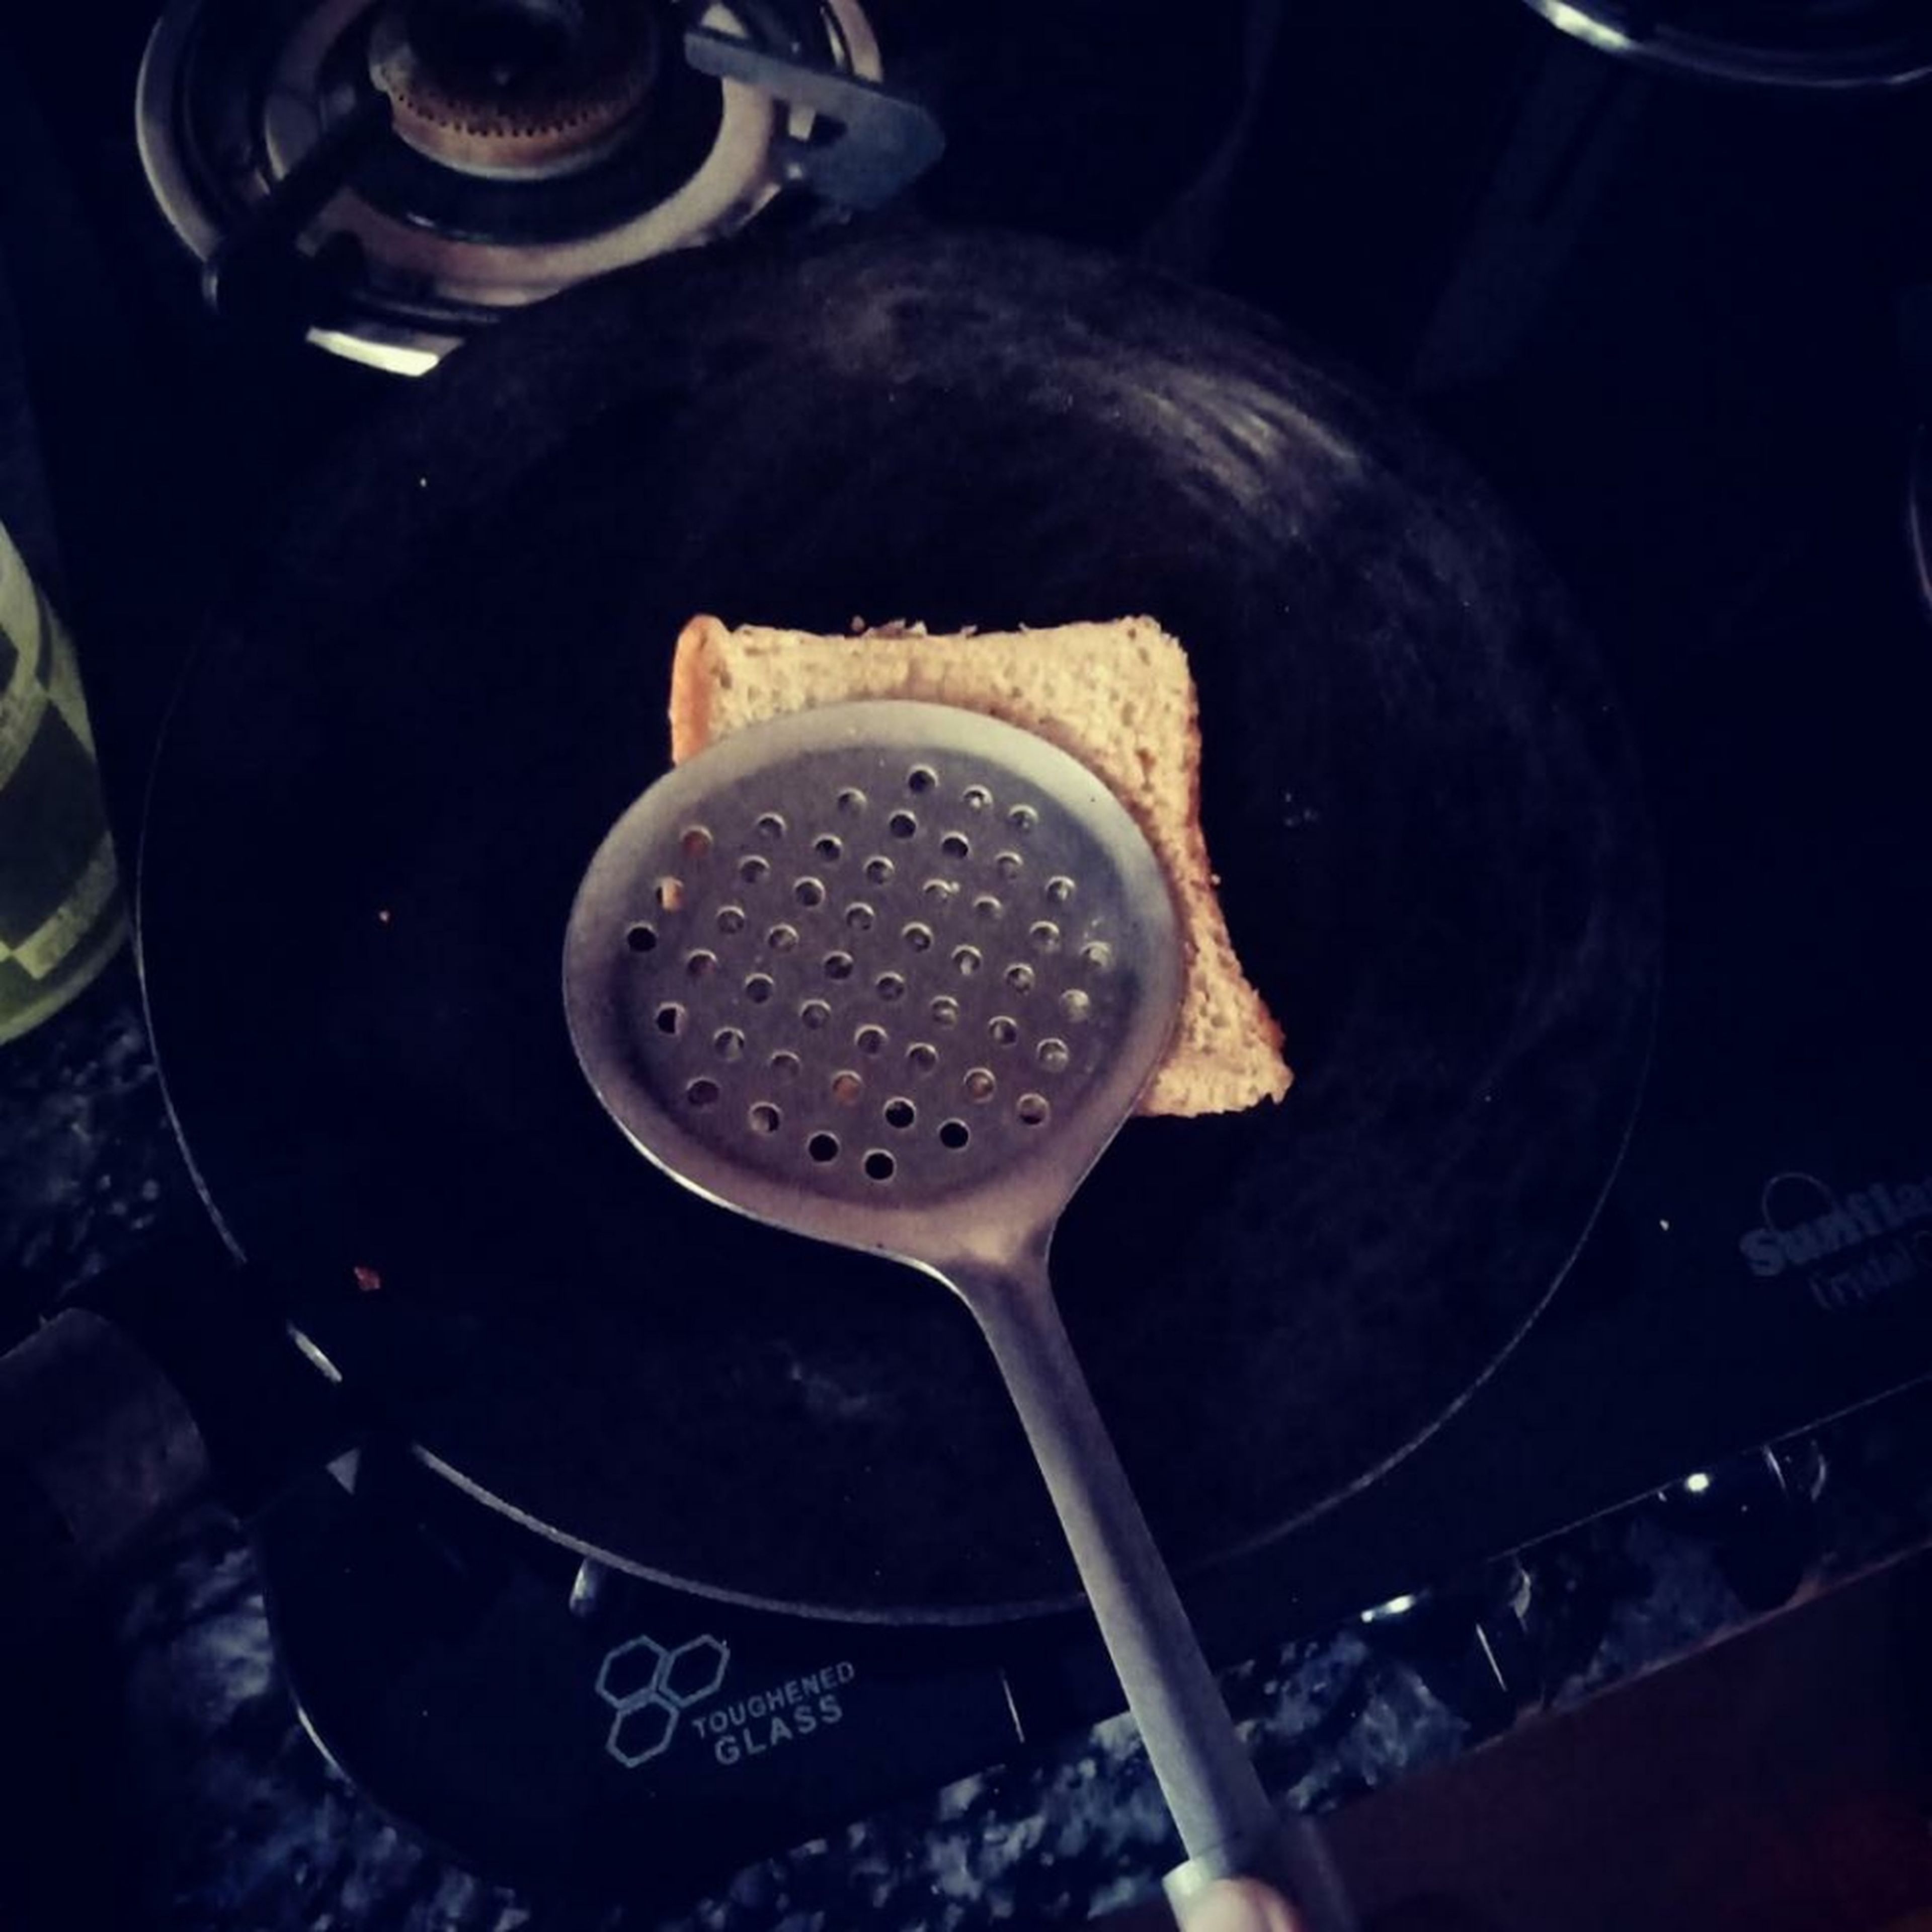 Toast the bread from both sides carefully.